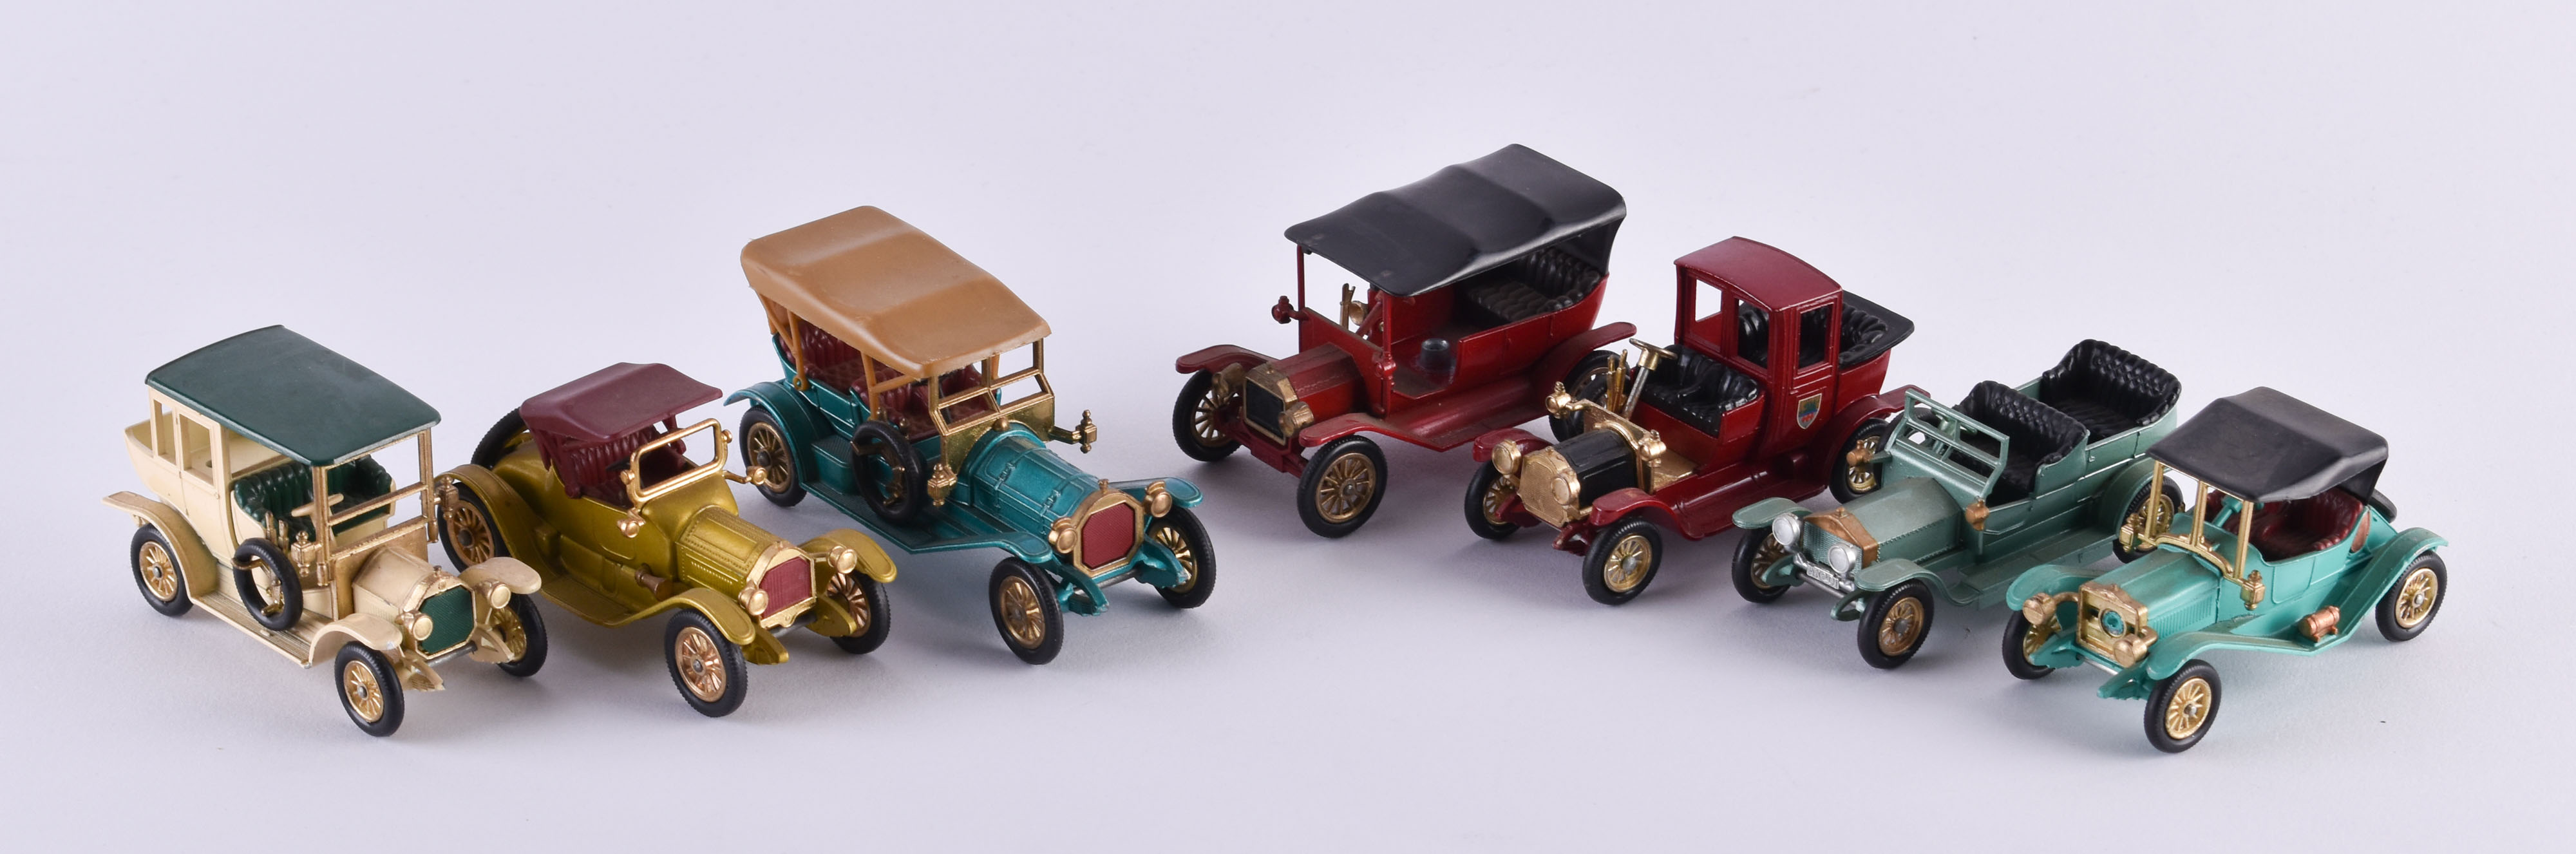 A group of model railway decoration model cars - Image 2 of 3